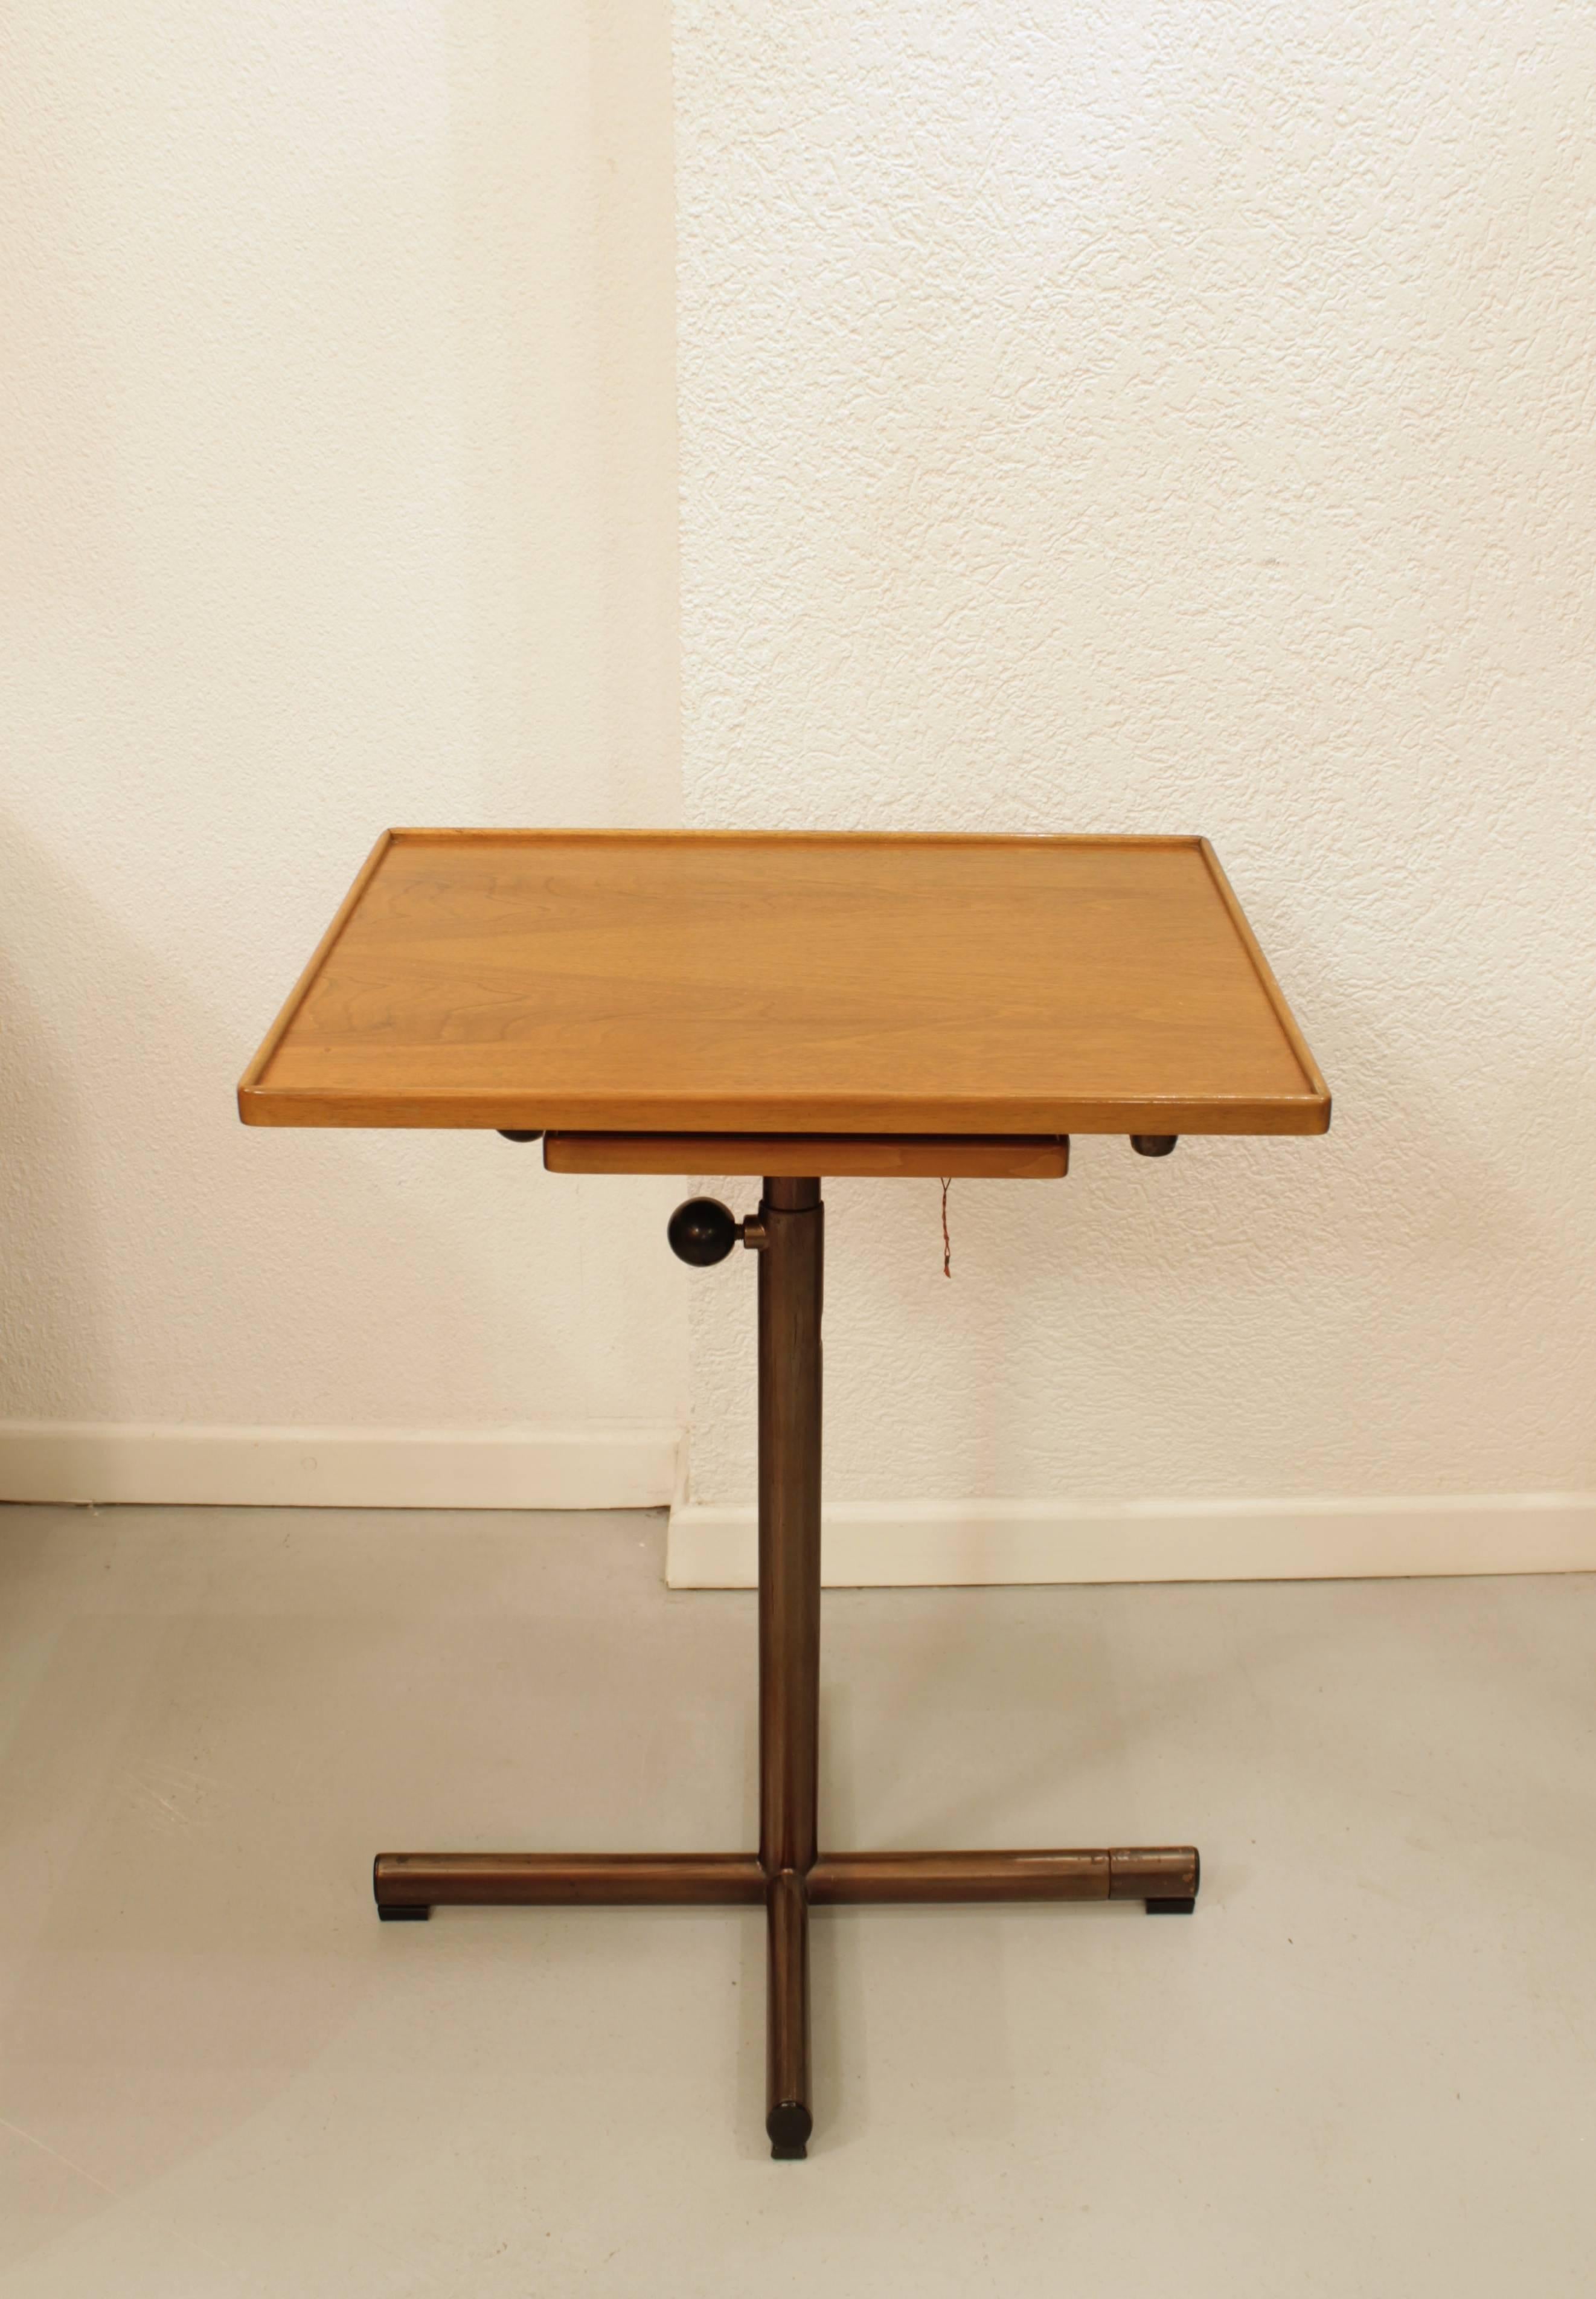 Swiss articulated occasional table by François Caruelle for Embru, Switzerland, circa 1950s
Multiple position available with the in genius system (pictures)
Tabletop can be removed and used as a tray.